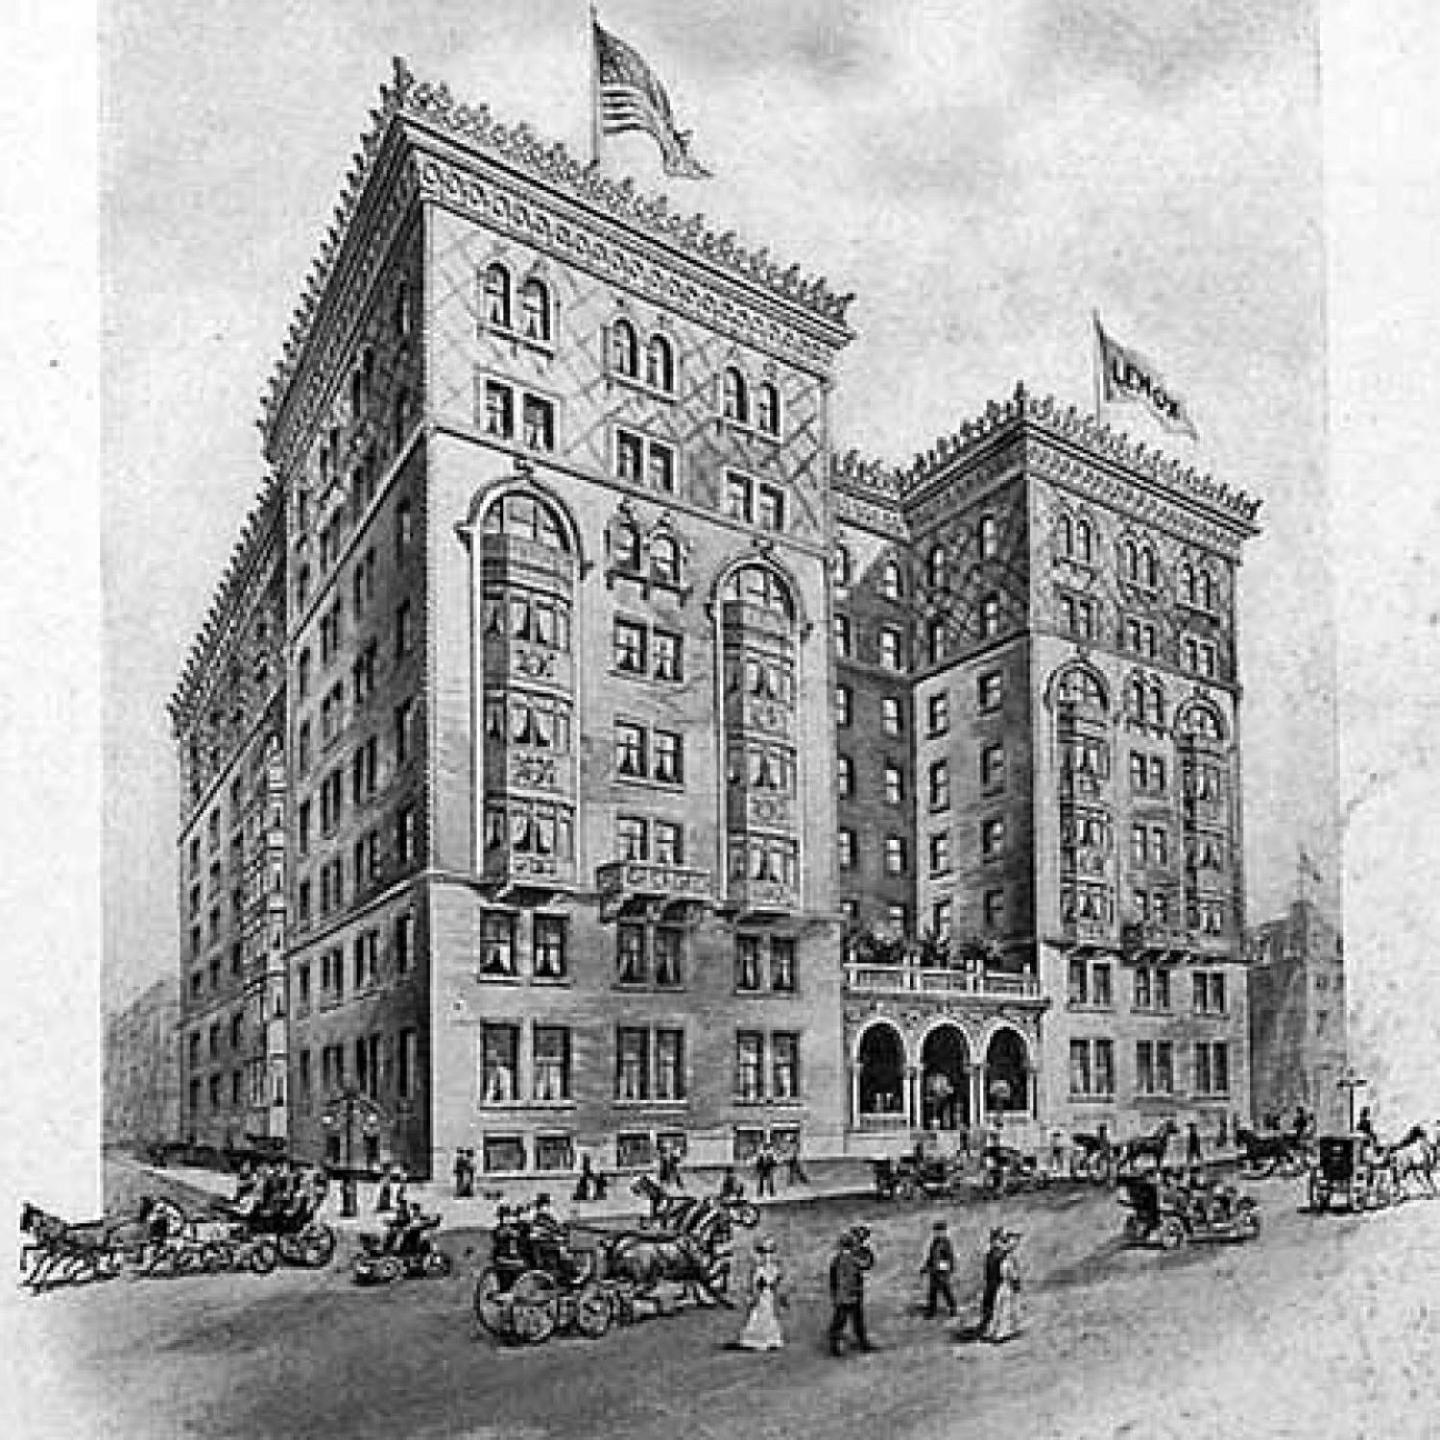 Lenox Hotel And Suites Buffalo Exterior photo